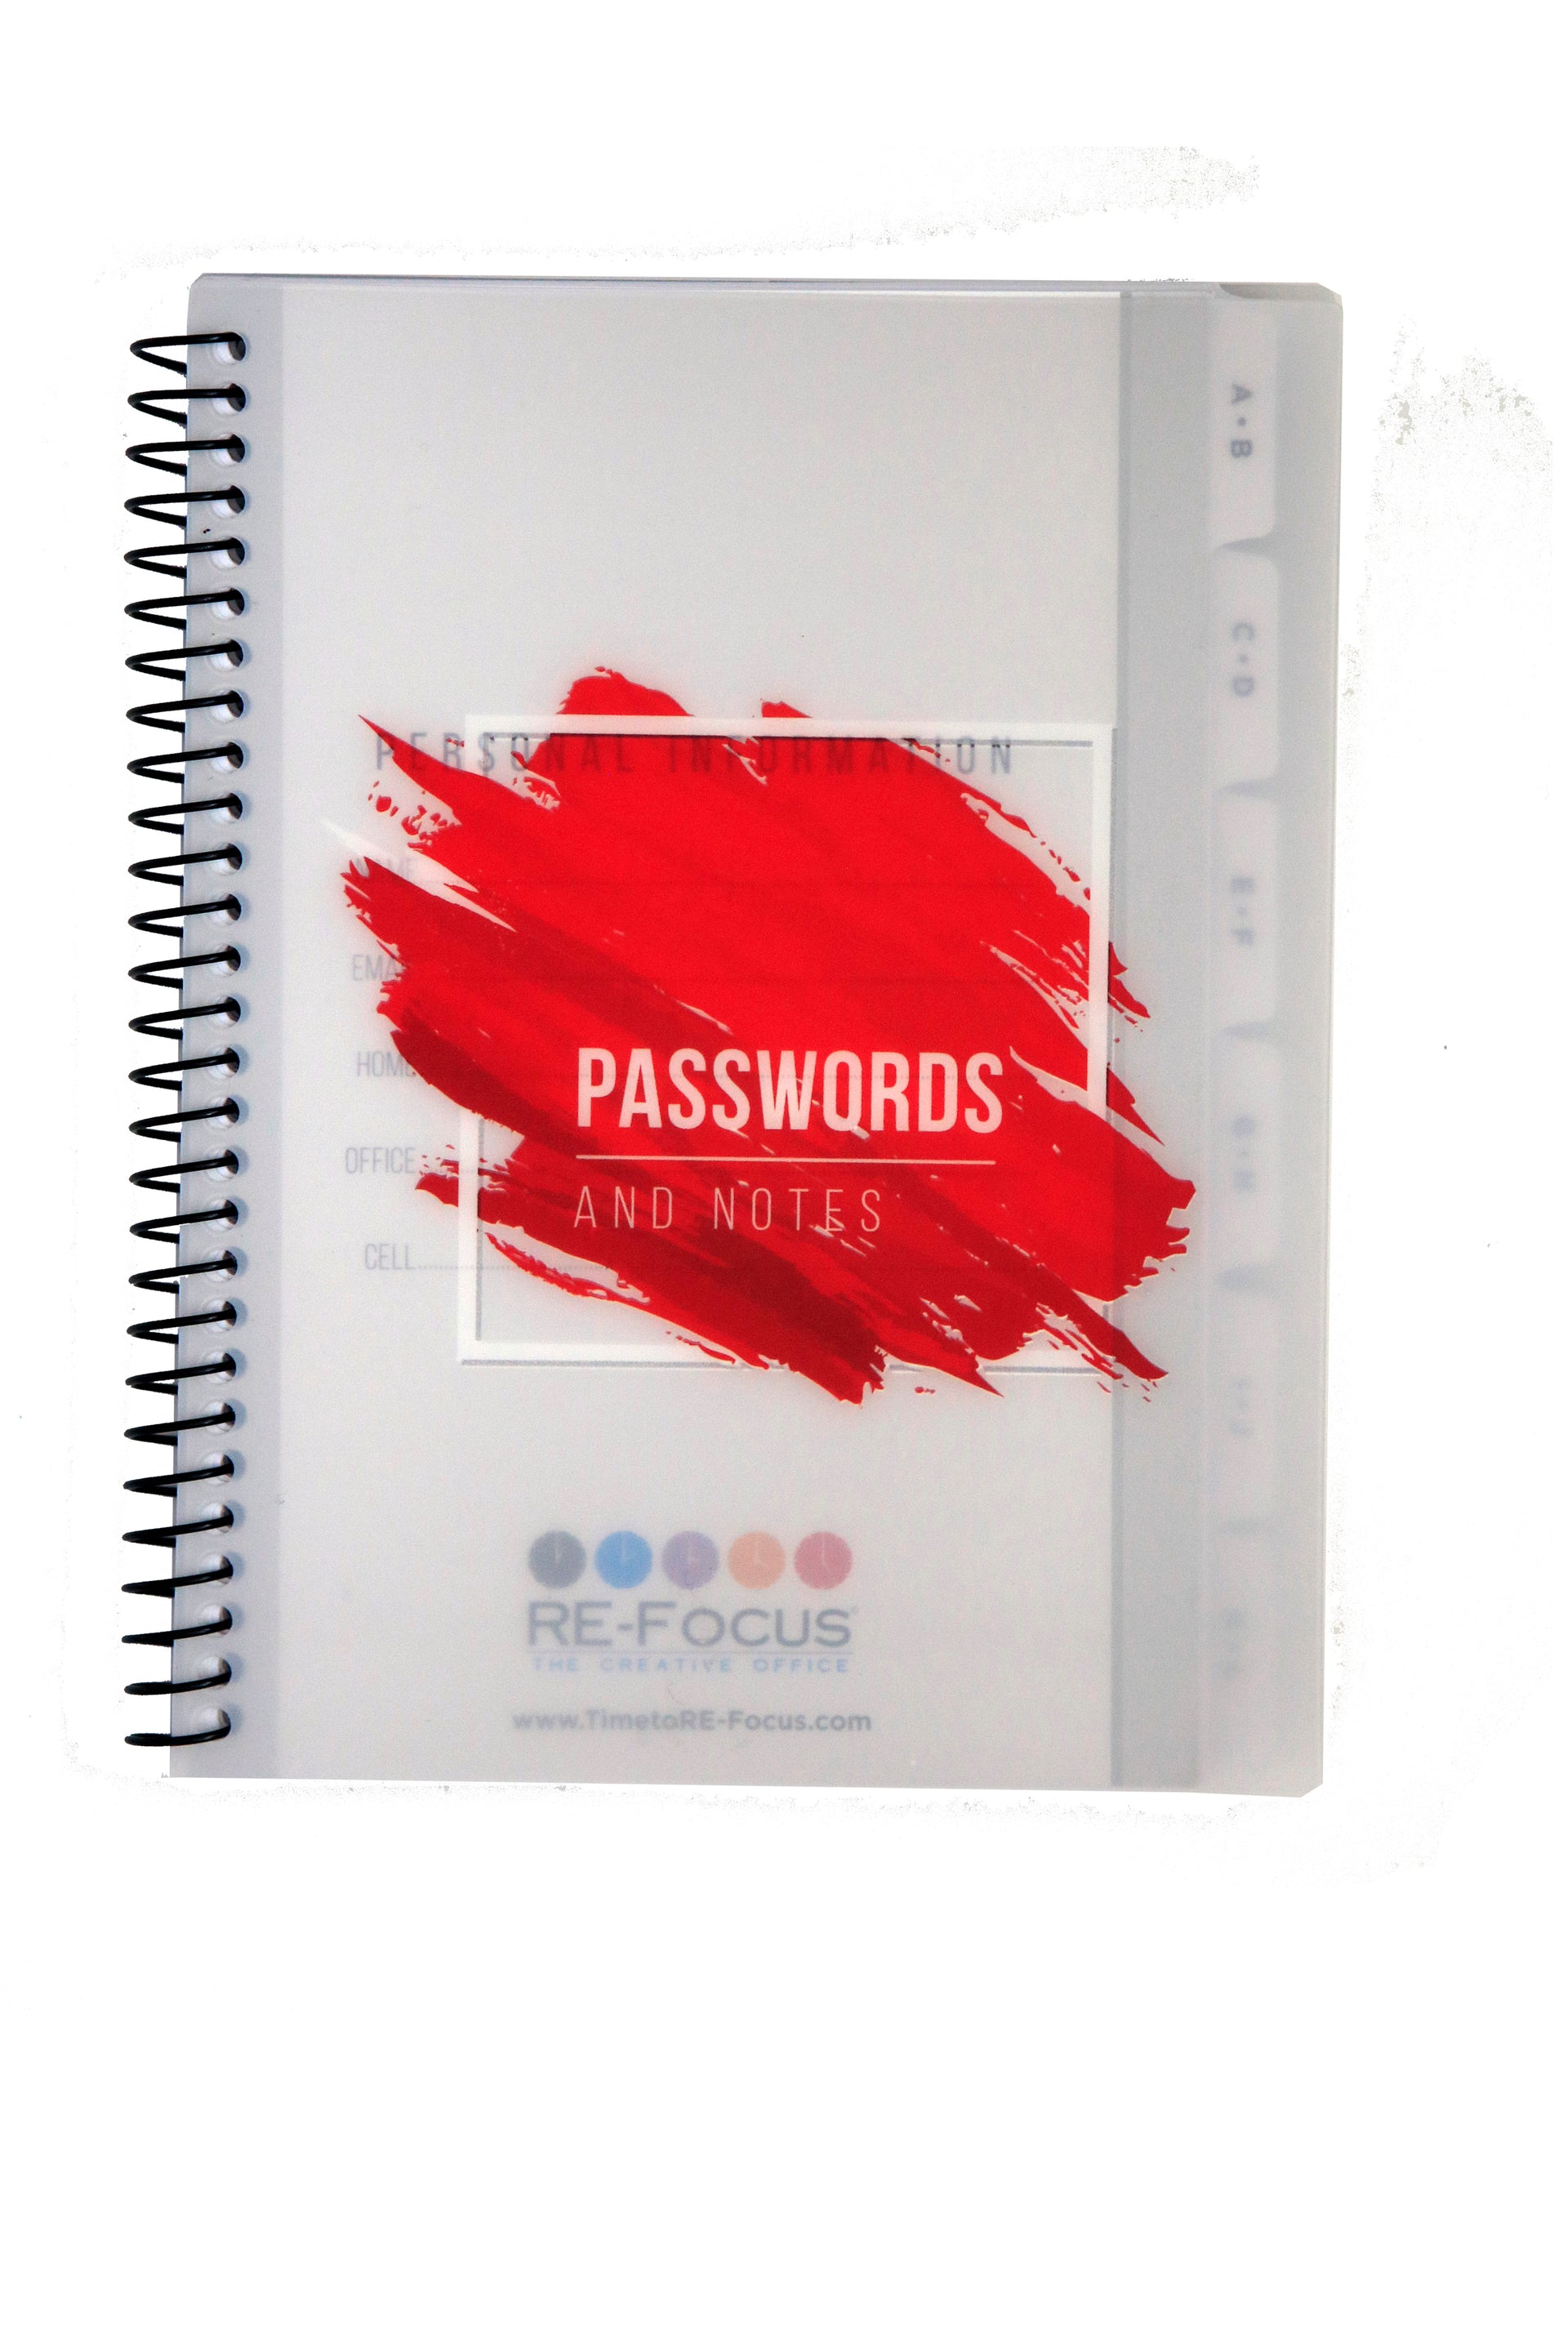 RE-FOCUS THE CREATIVE OFFICE, Small/Mini Password Book, Alphabetical Tabs, Spiral Binding